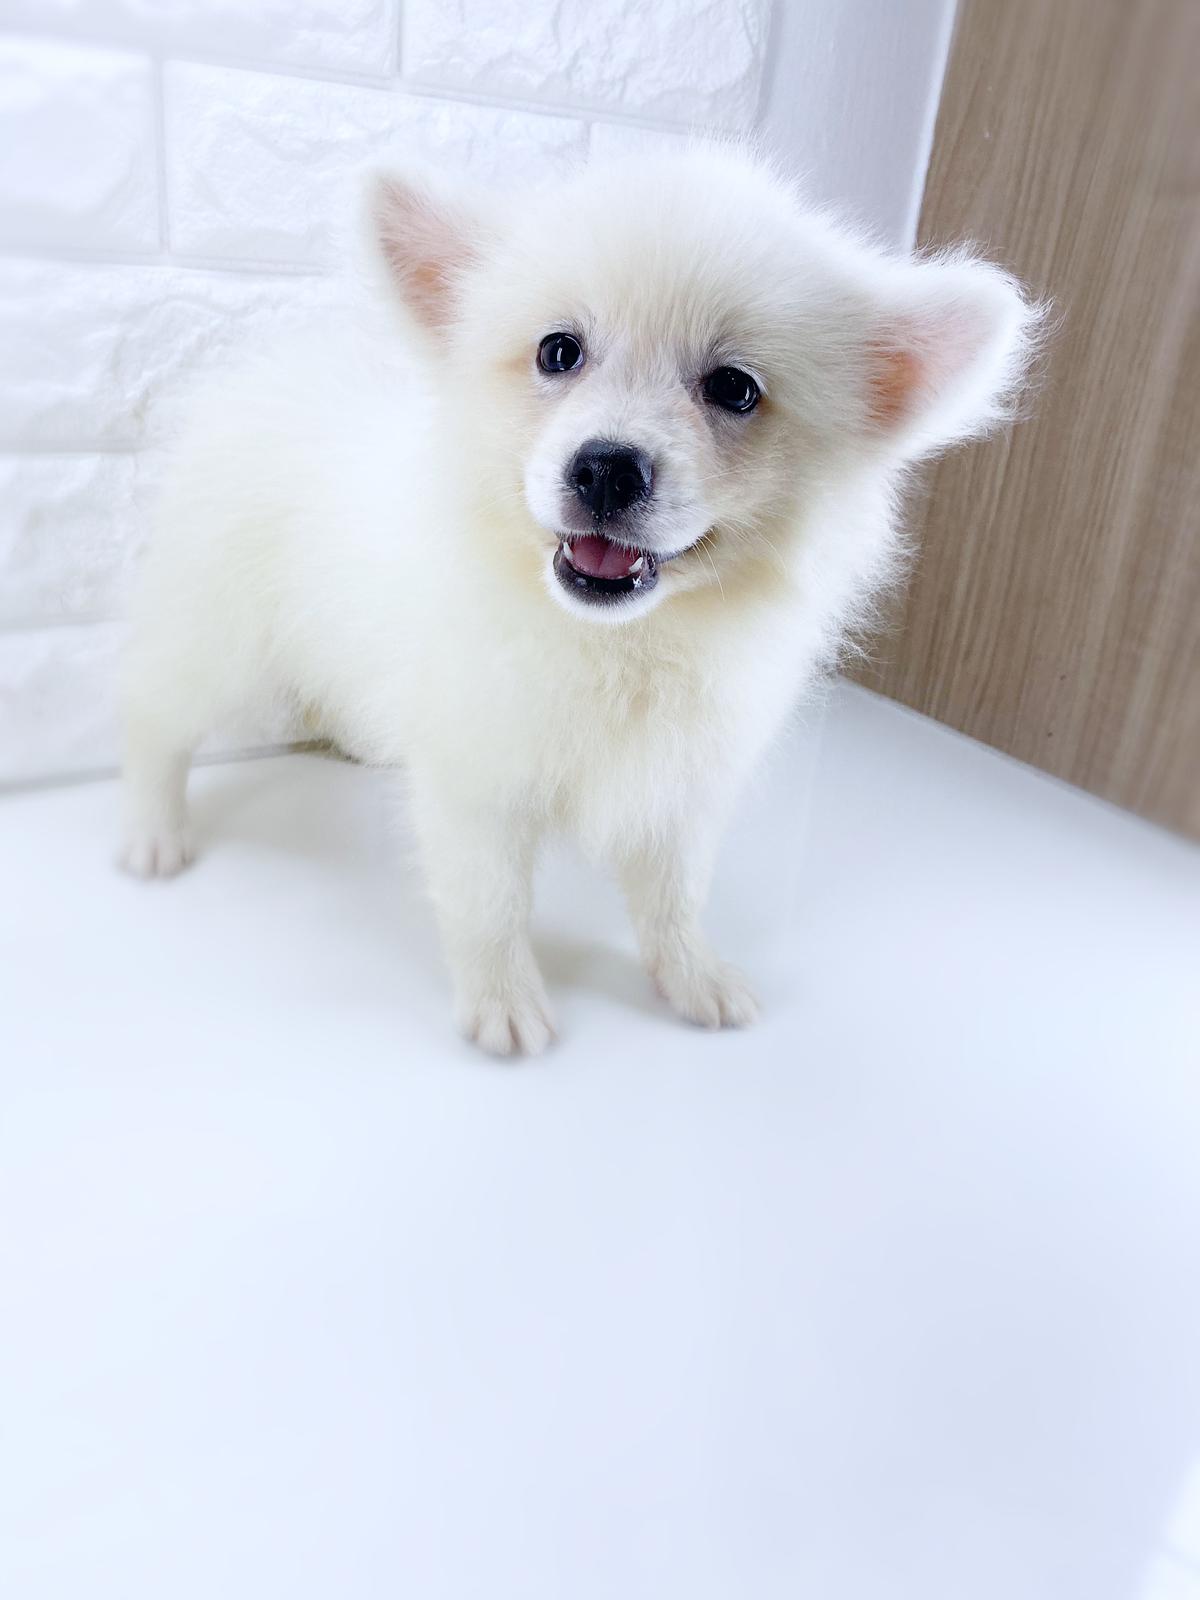 Best Quality Japanese Spitz Puppies For Sale Singapore October 2020